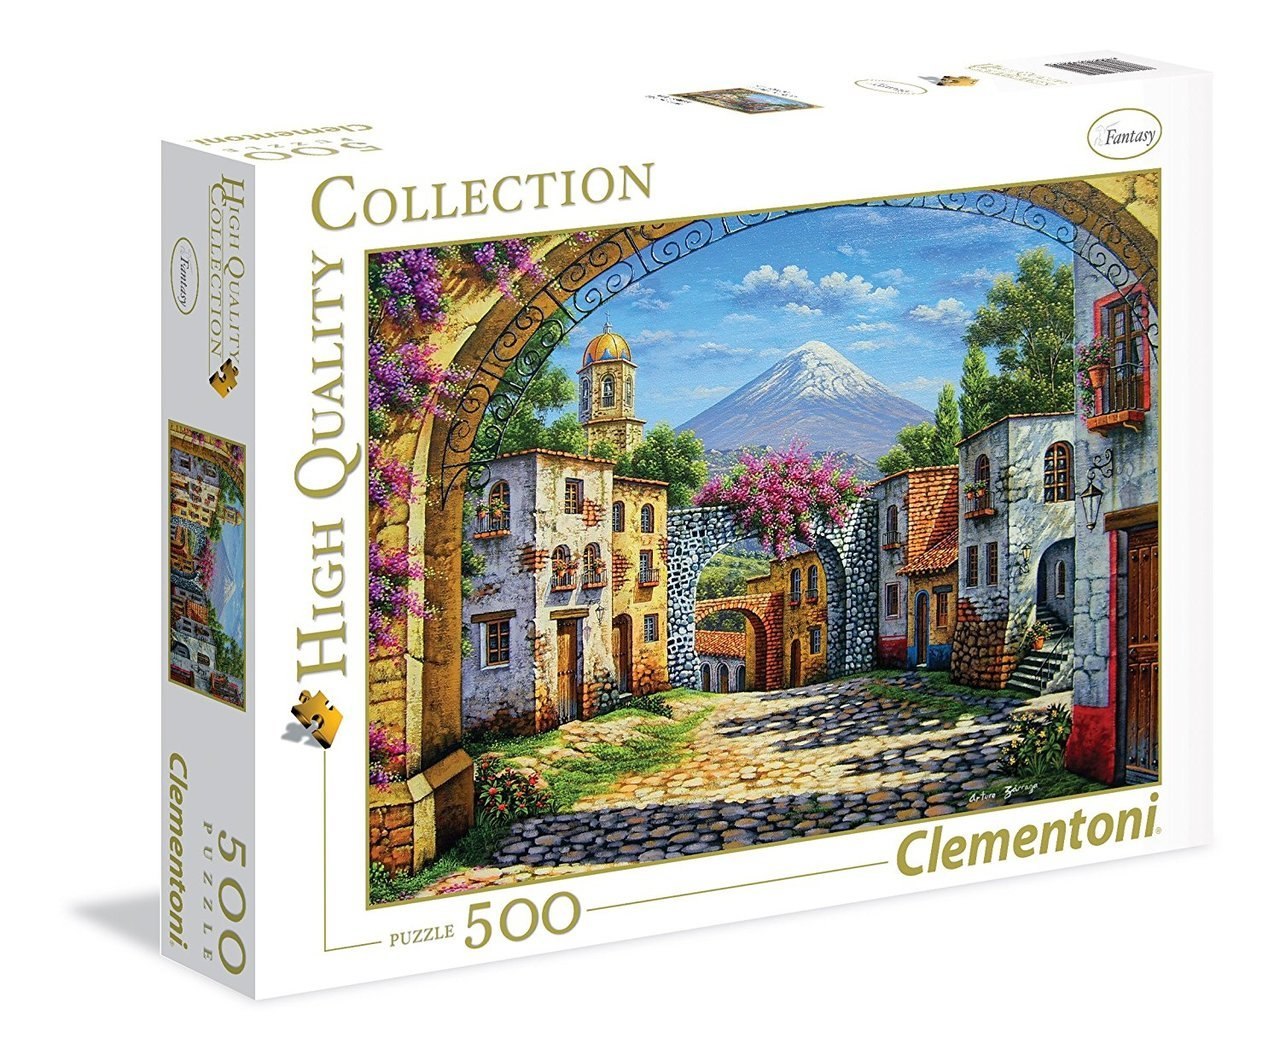 The Volcano - 500pc Jigsaw Puzzle by Clementoni - image 1